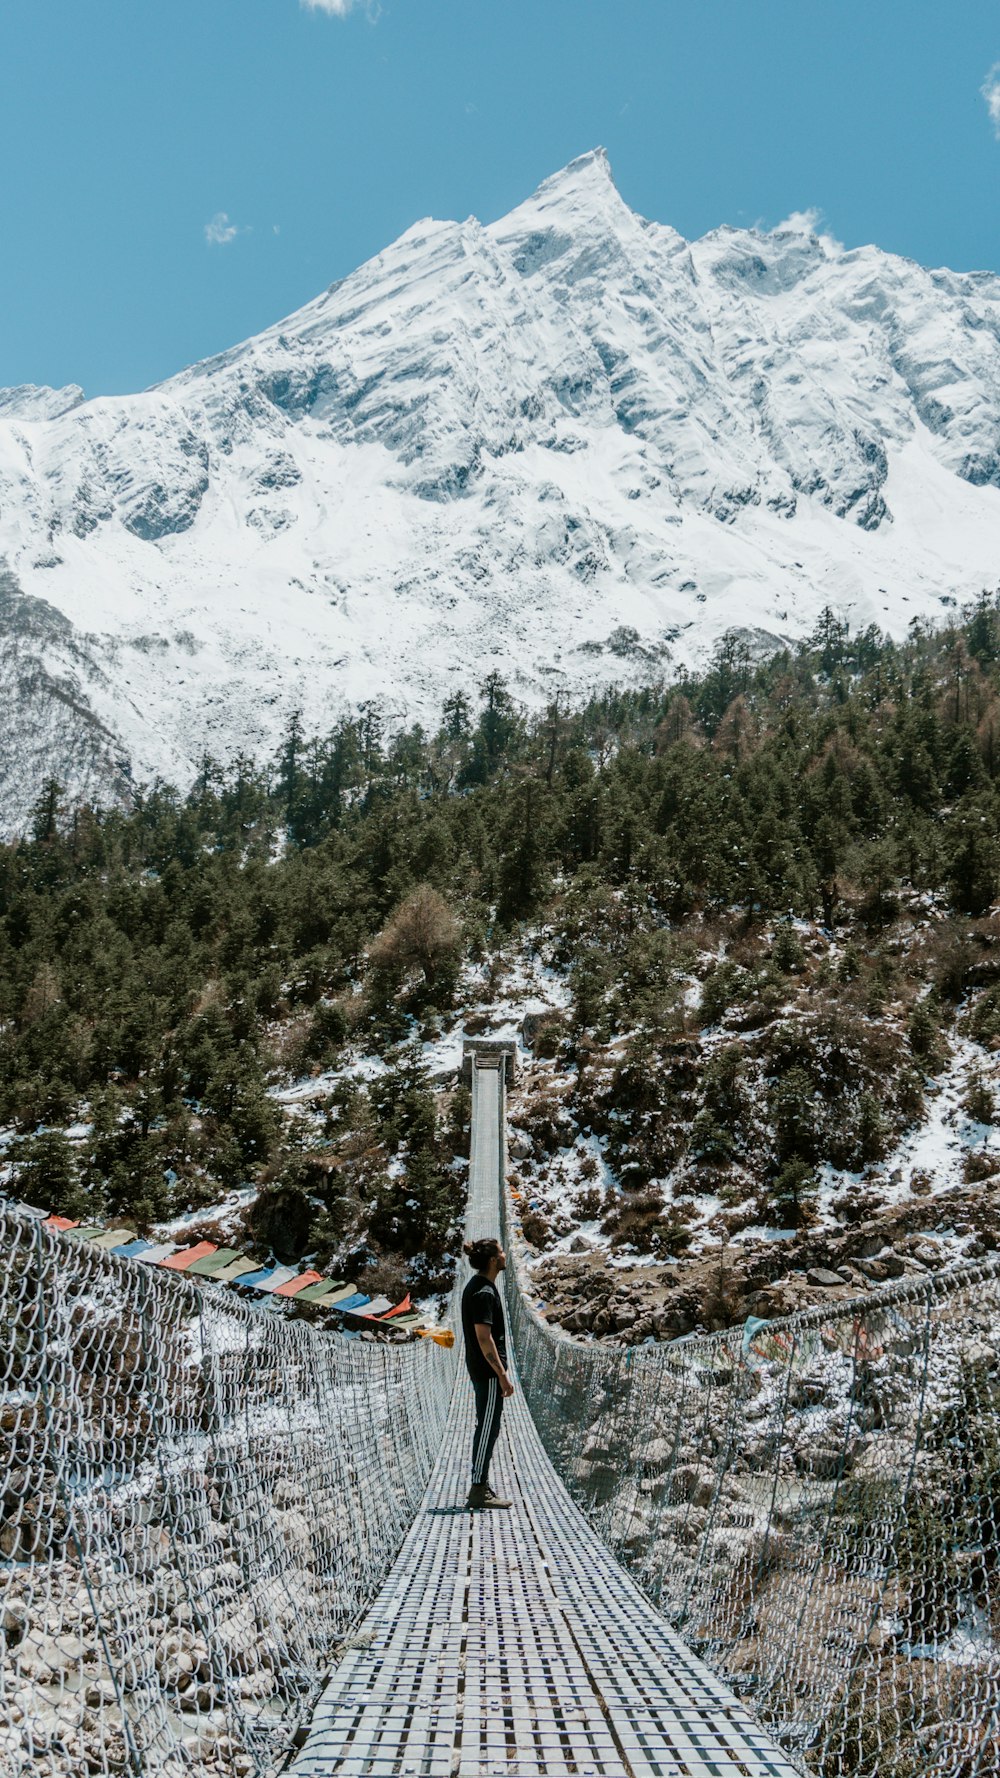 a person walking across a suspension bridge with a mountain in the background